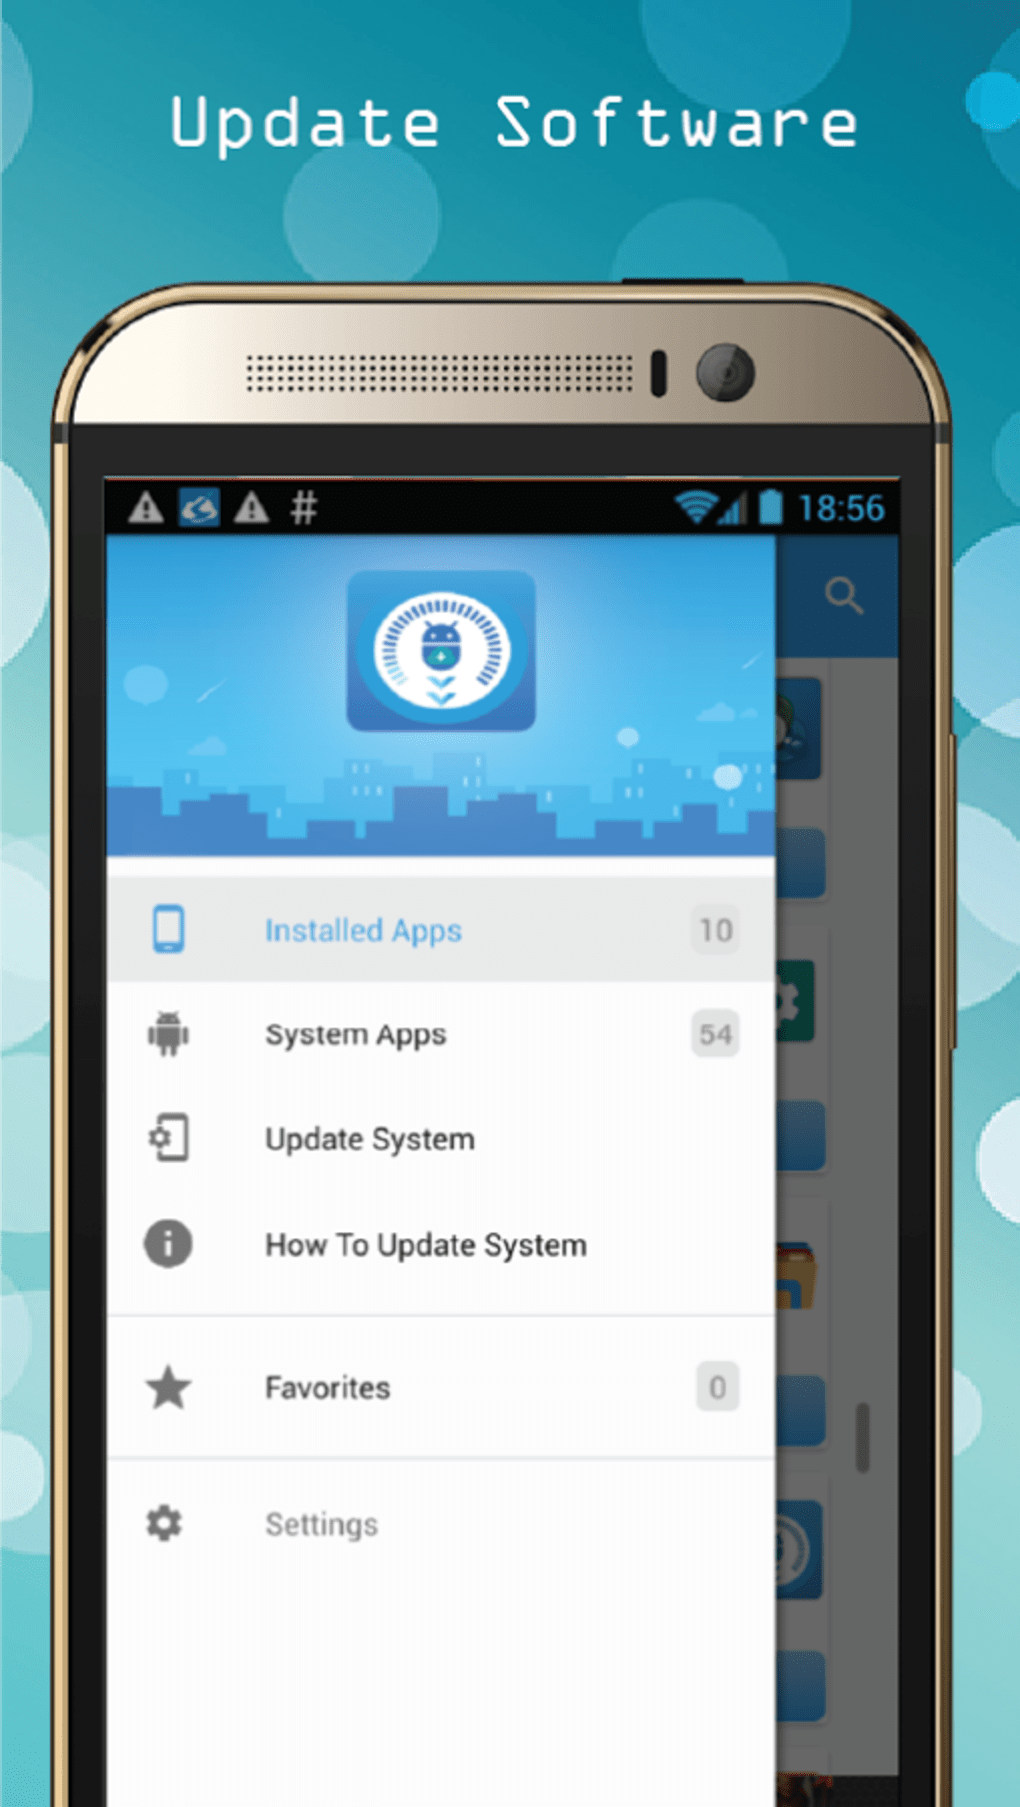 android version updater software free download